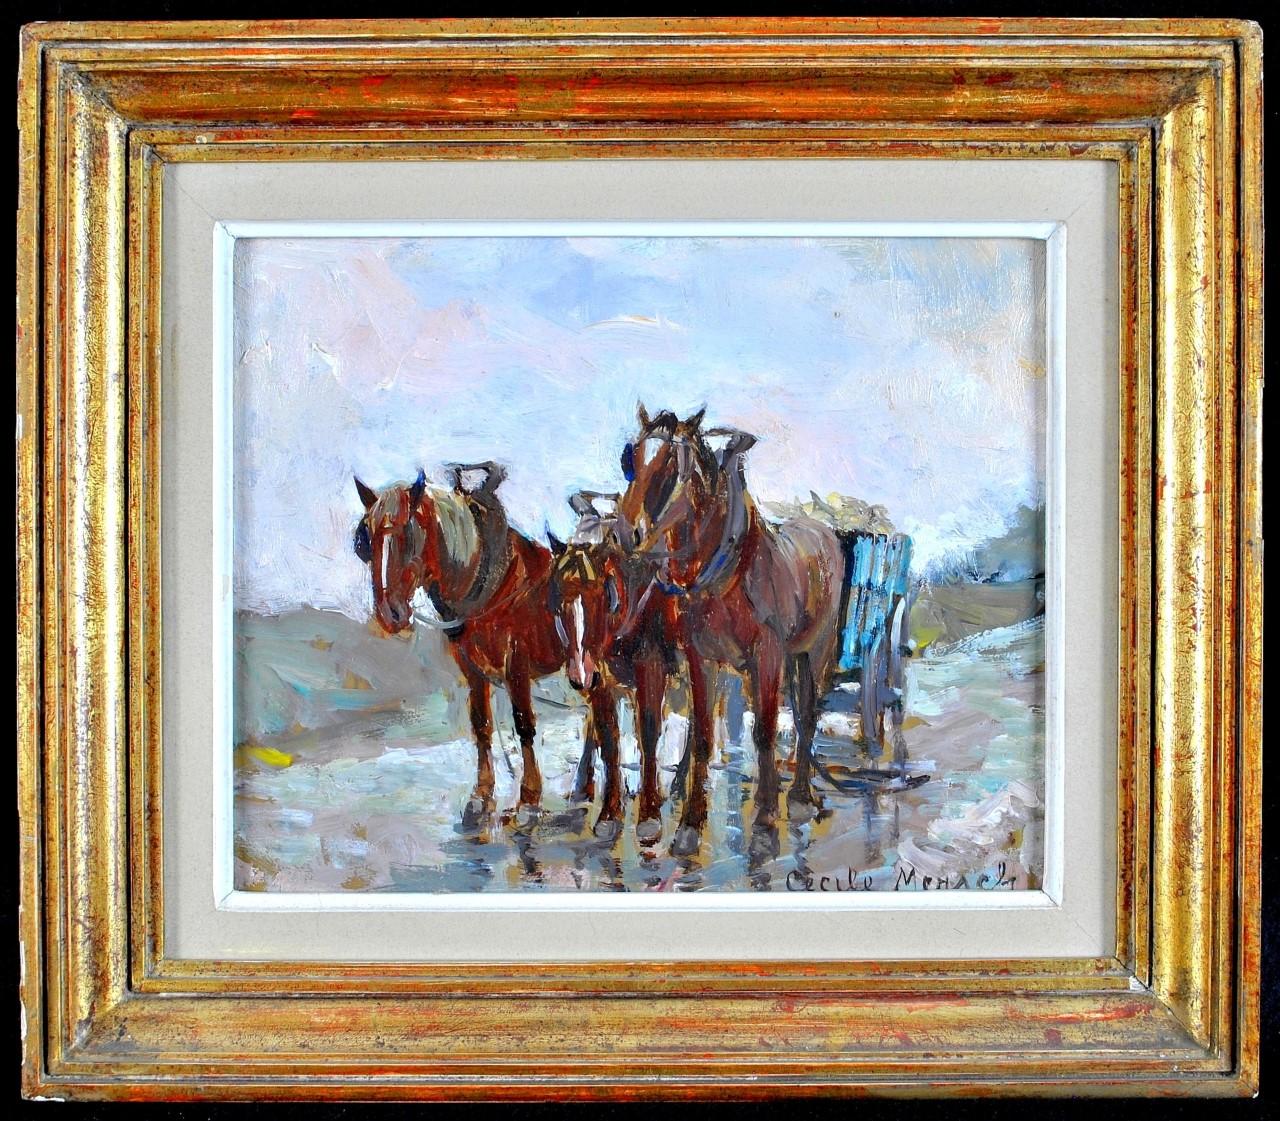 Cecile Mersch Landscape Painting - Horses Pulling Hay - Belgian Post-Impressionist Oil on Board Painting